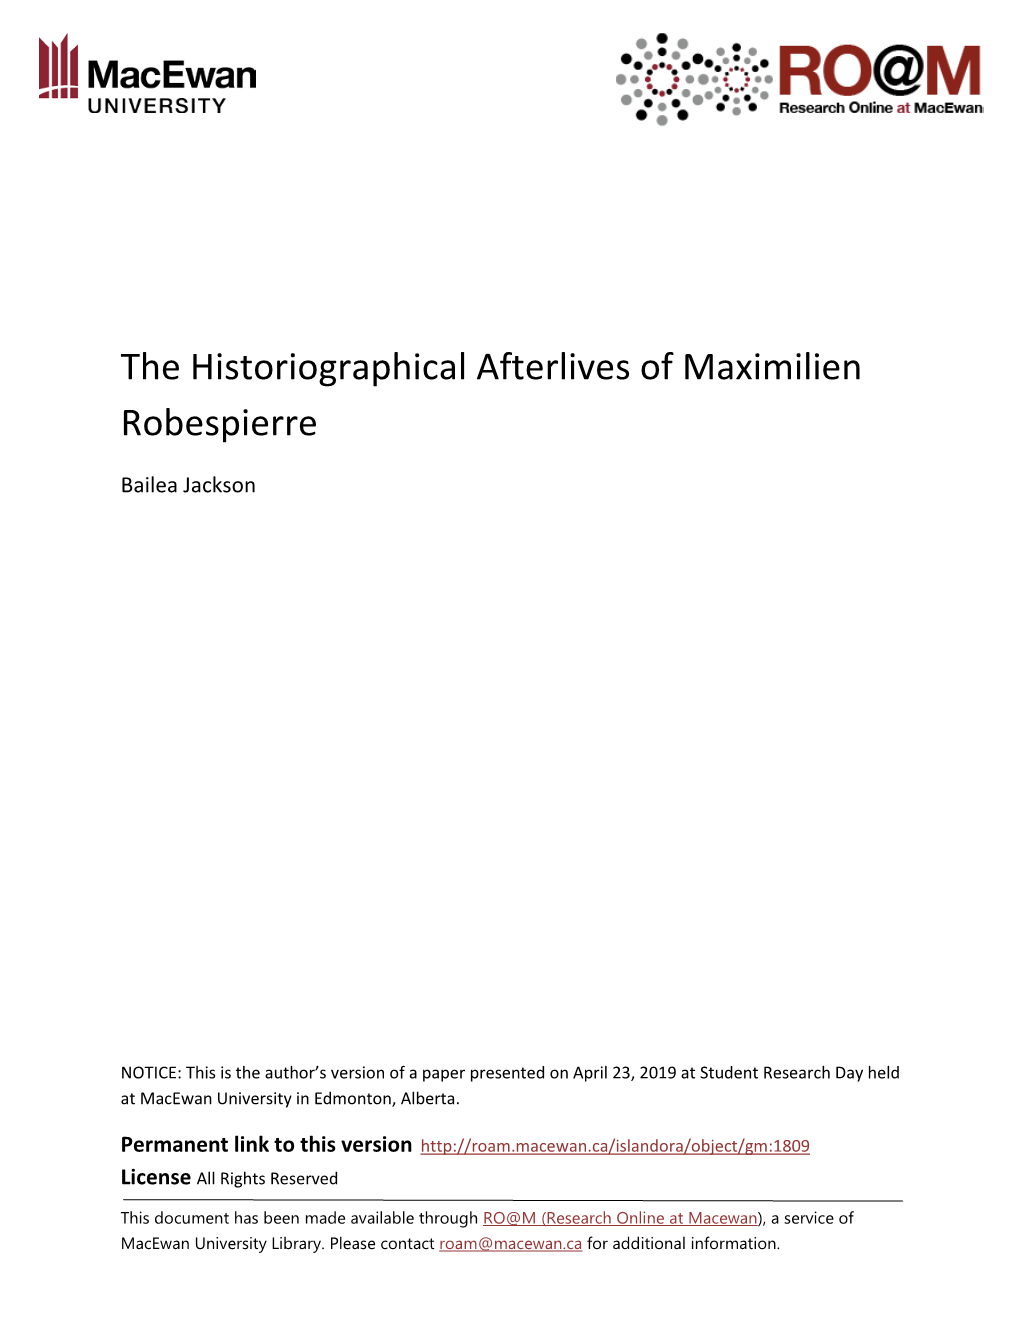 The Historiographical Afterlives of Maximilien Robespierre